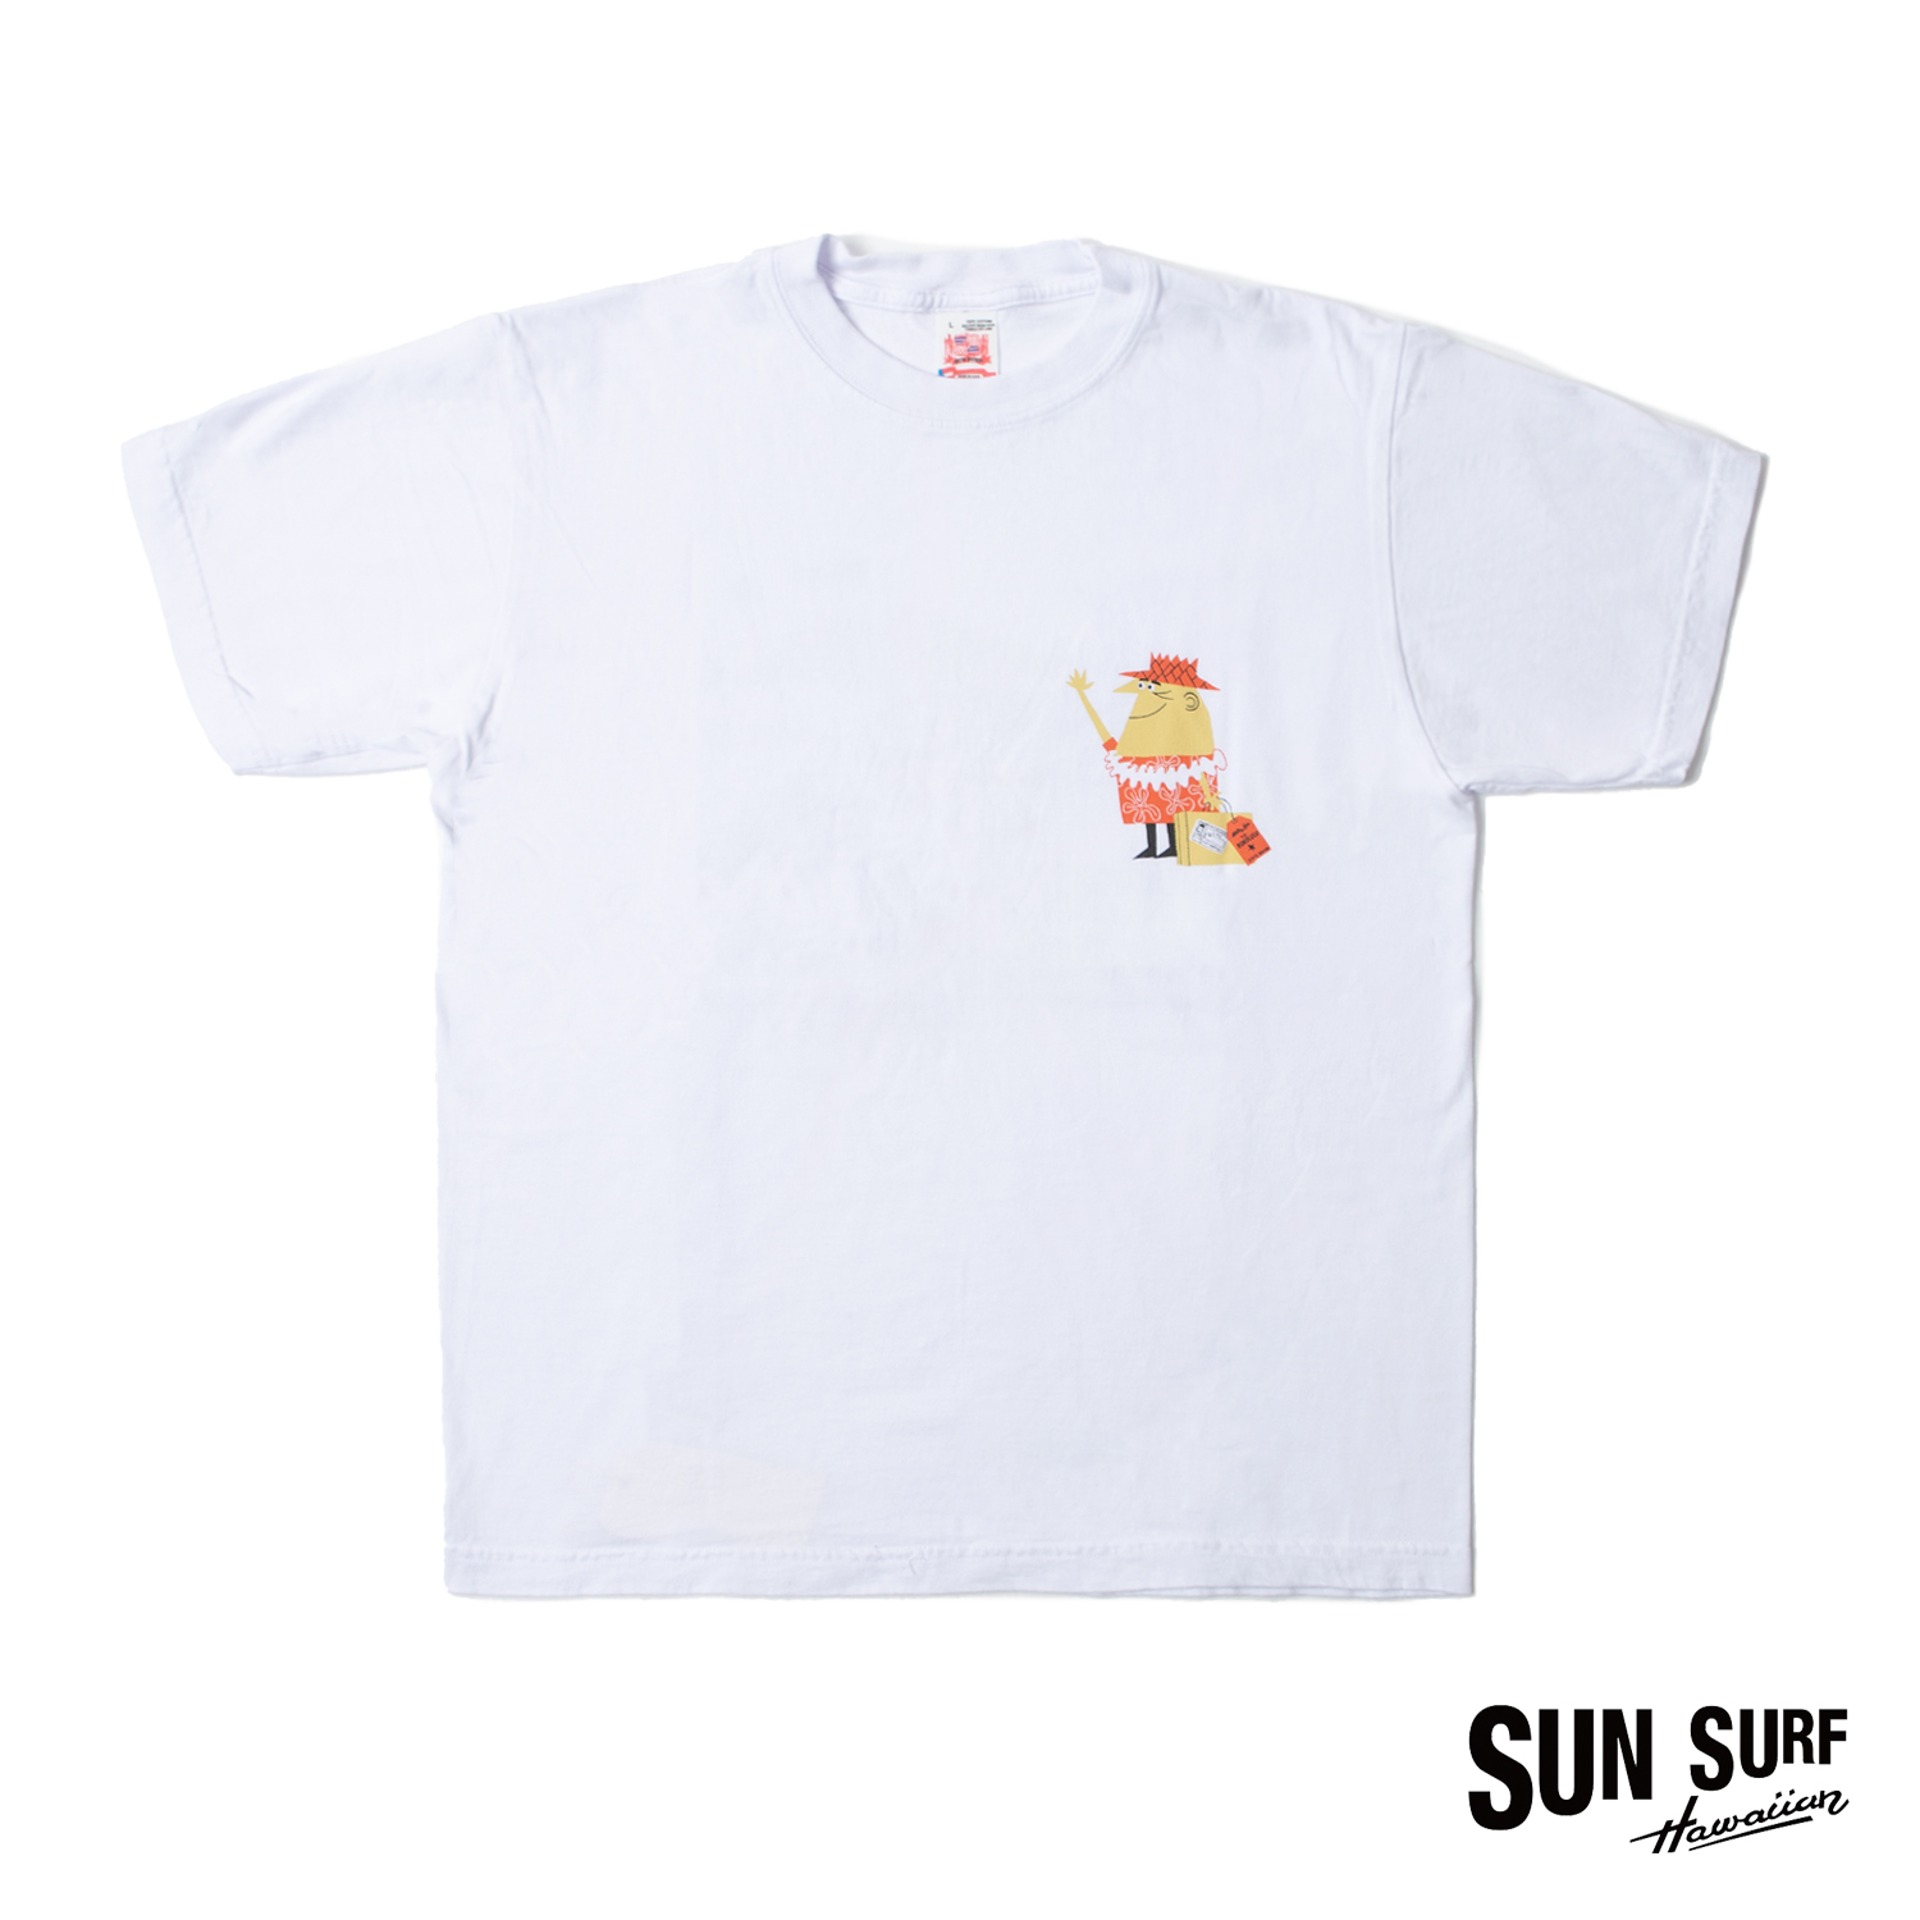 S/S T-SHIRT  &quot;SAILING TO PARADISE&quot;  BY RYOHEI YANAGIHARA with MOOKIE (White)